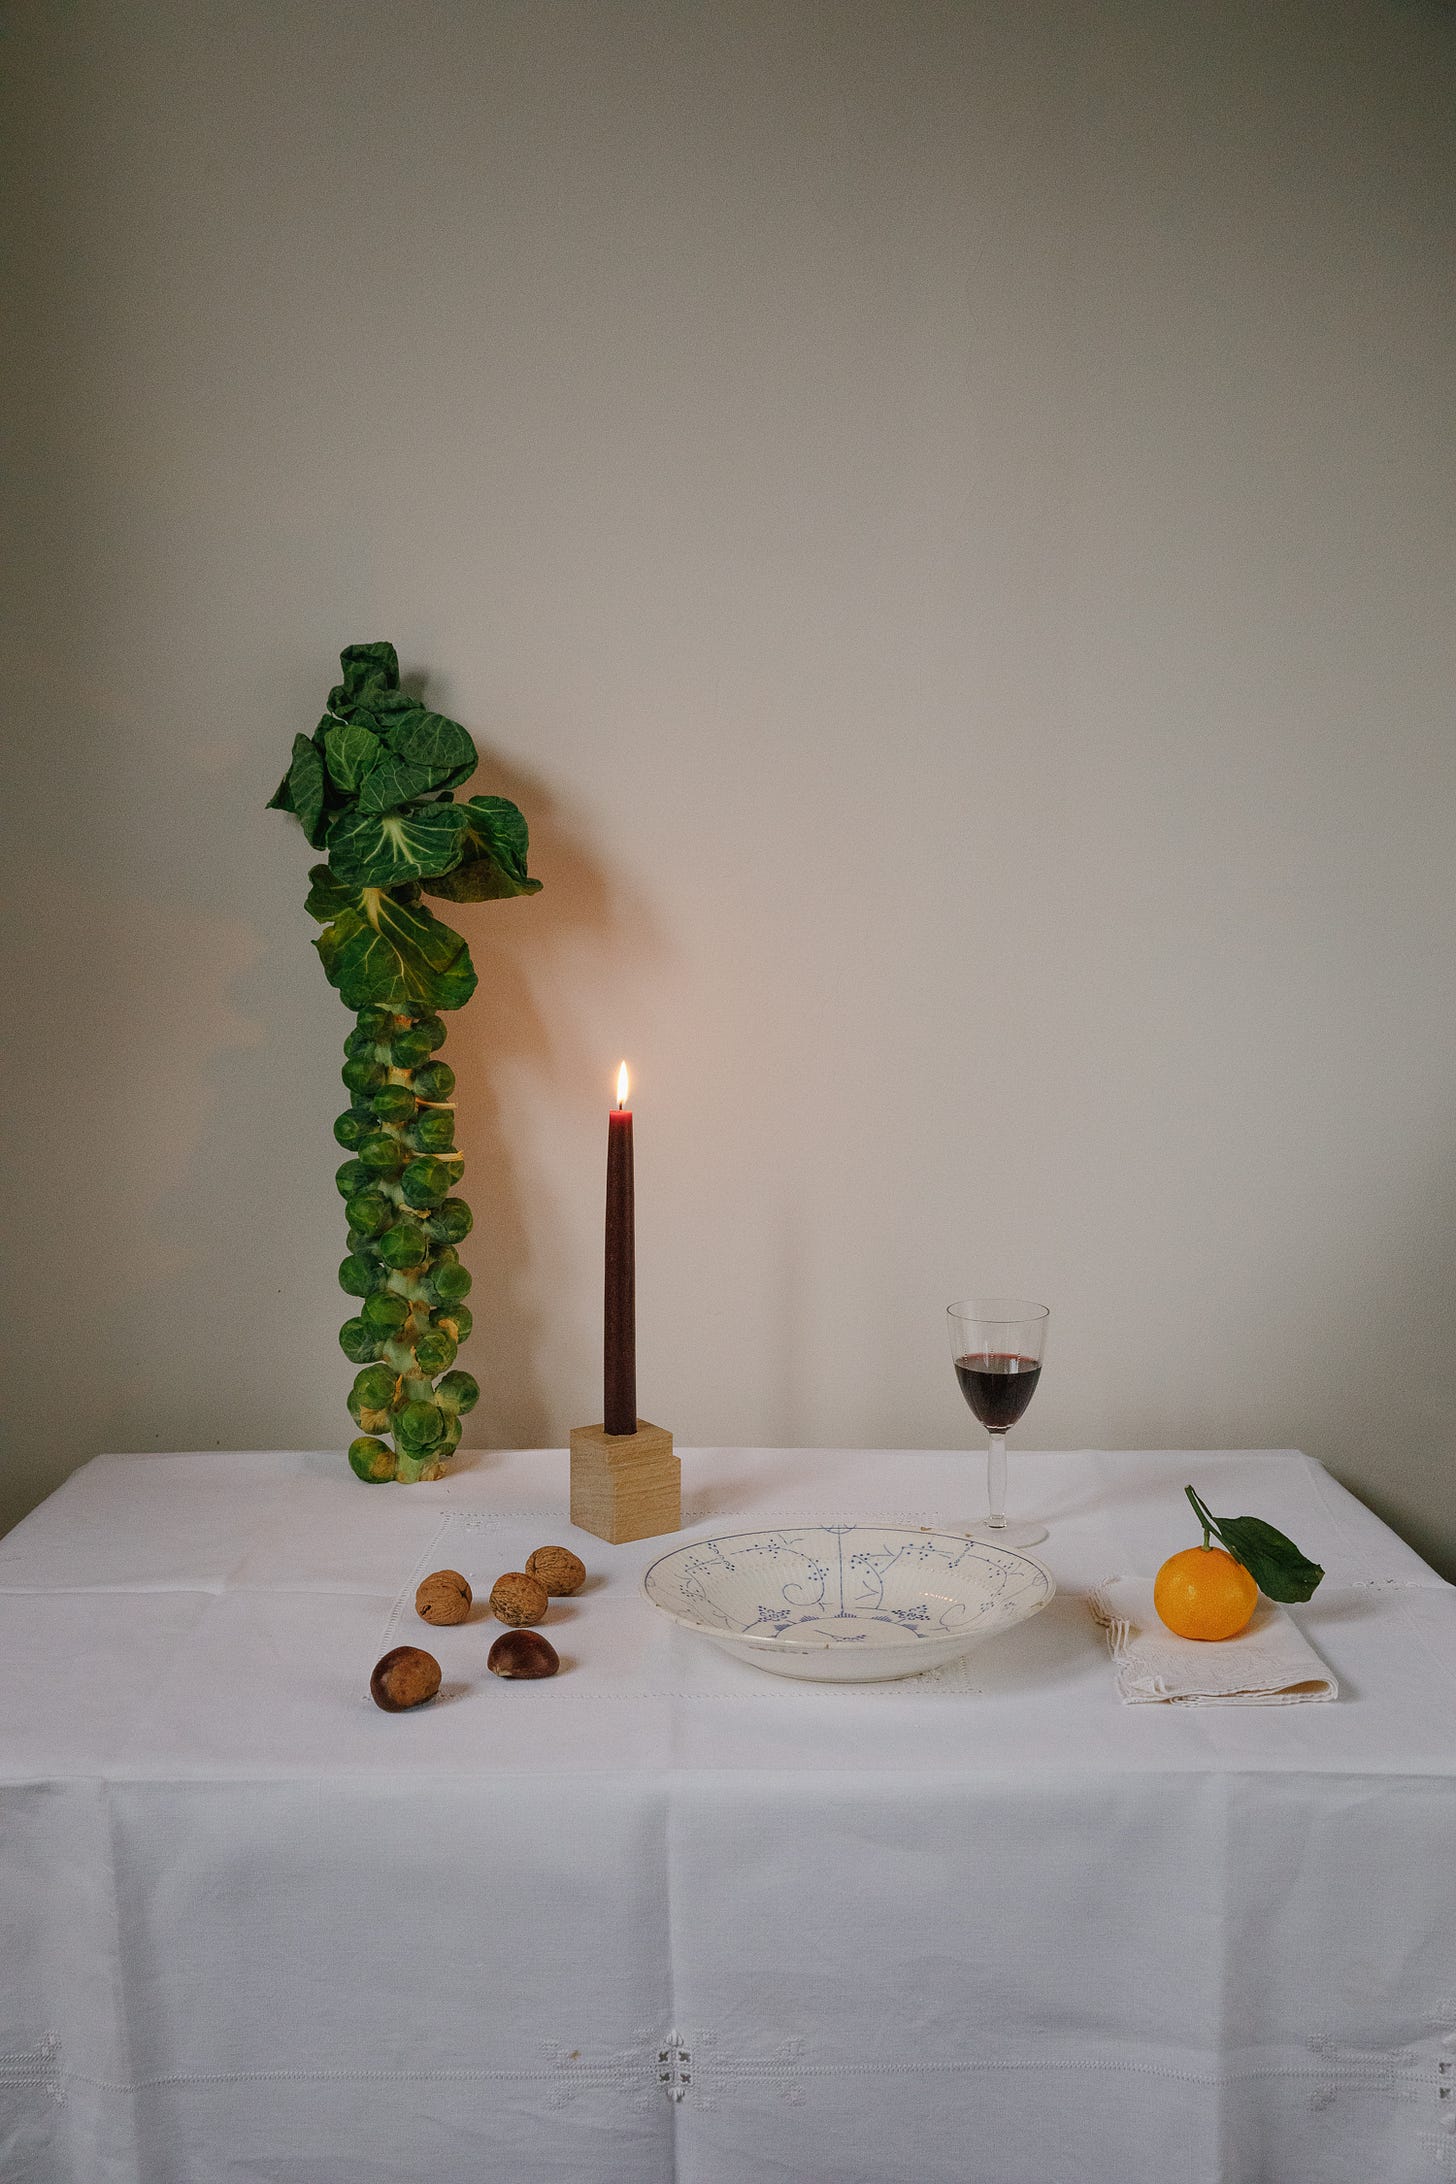 a dinner table scene with a tablecloth, a stick of sprouts, a lit candle in a wooden candle holder, a glass of red wine, a bowl, some cracked walnuts and an orange.